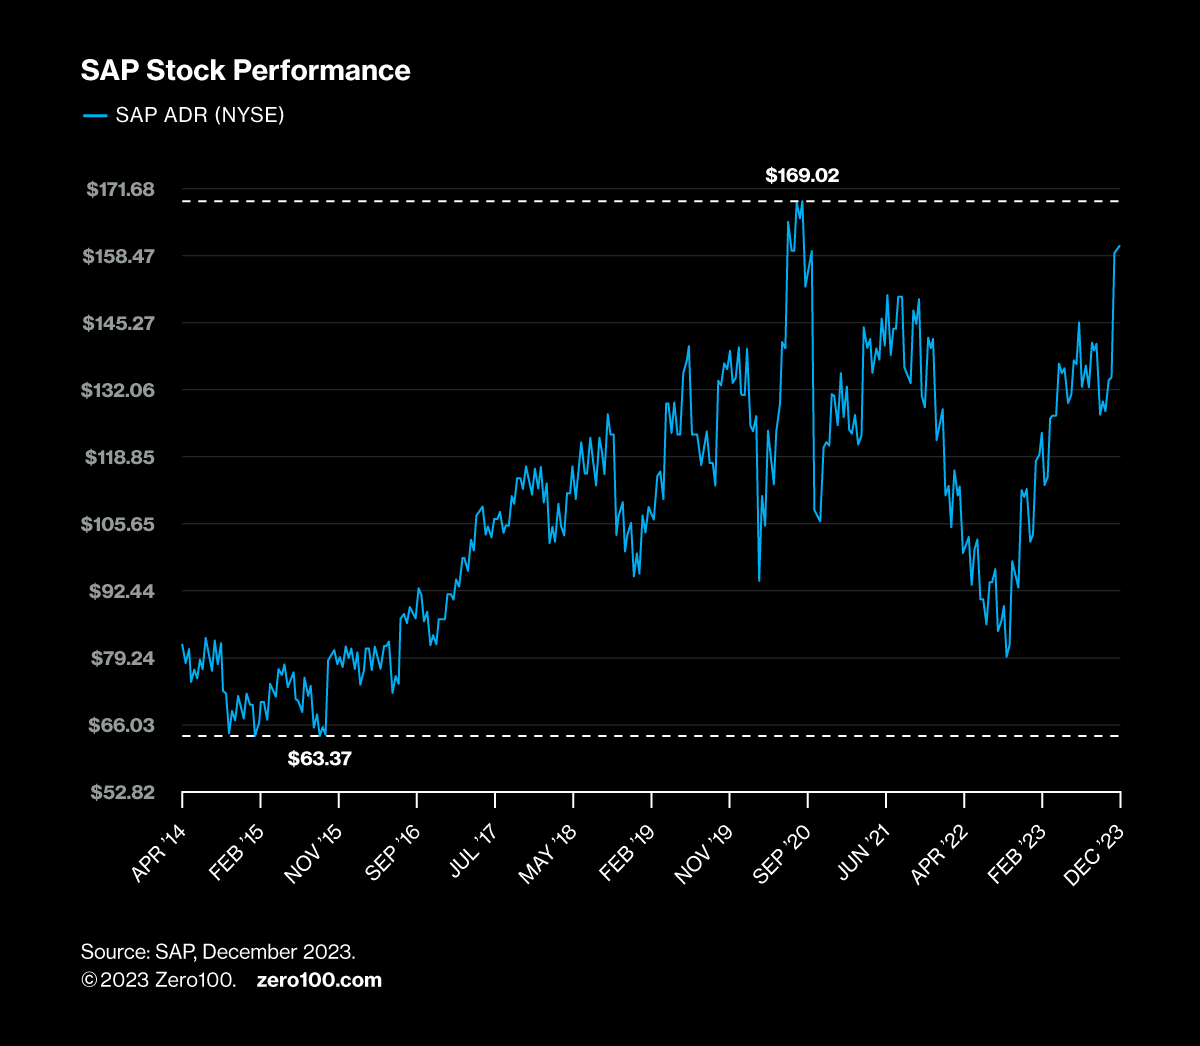 Line graph showing SAP stock performance from April 2014 to December 2023.
Source: SAP, December 2023.